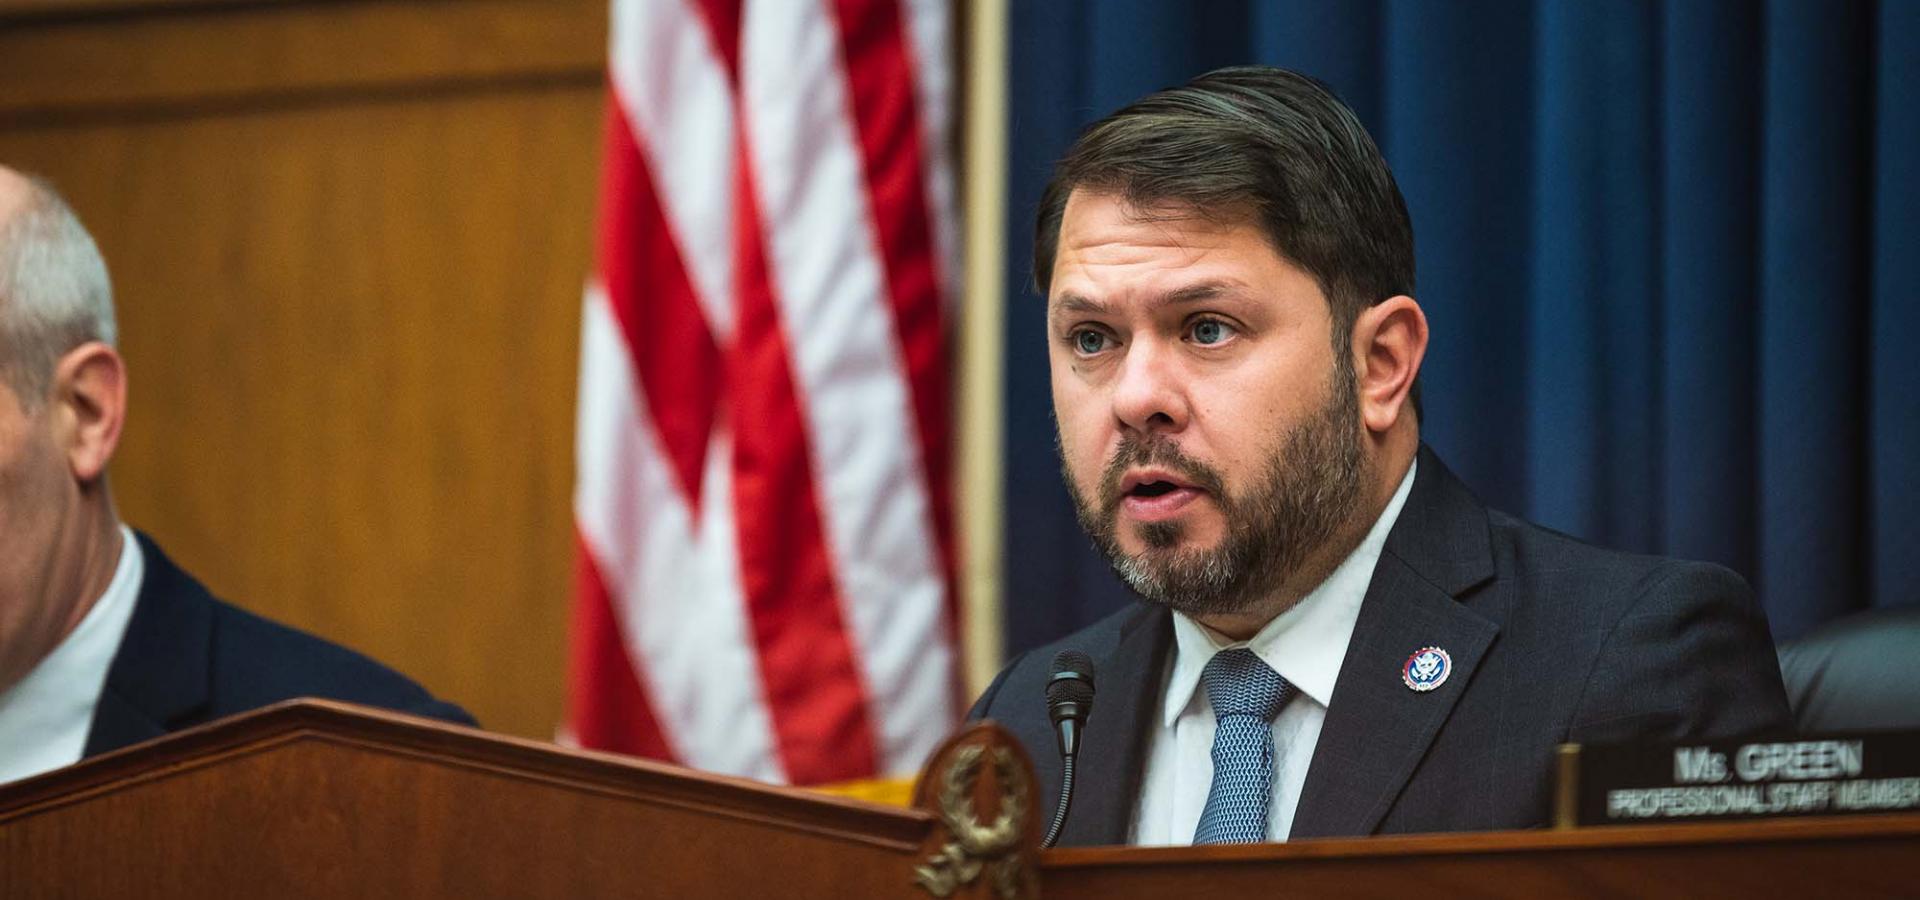 Rep. Gallego chairs a hearing of the House Armed Services Subcomittee on Intelligence and Special Operations